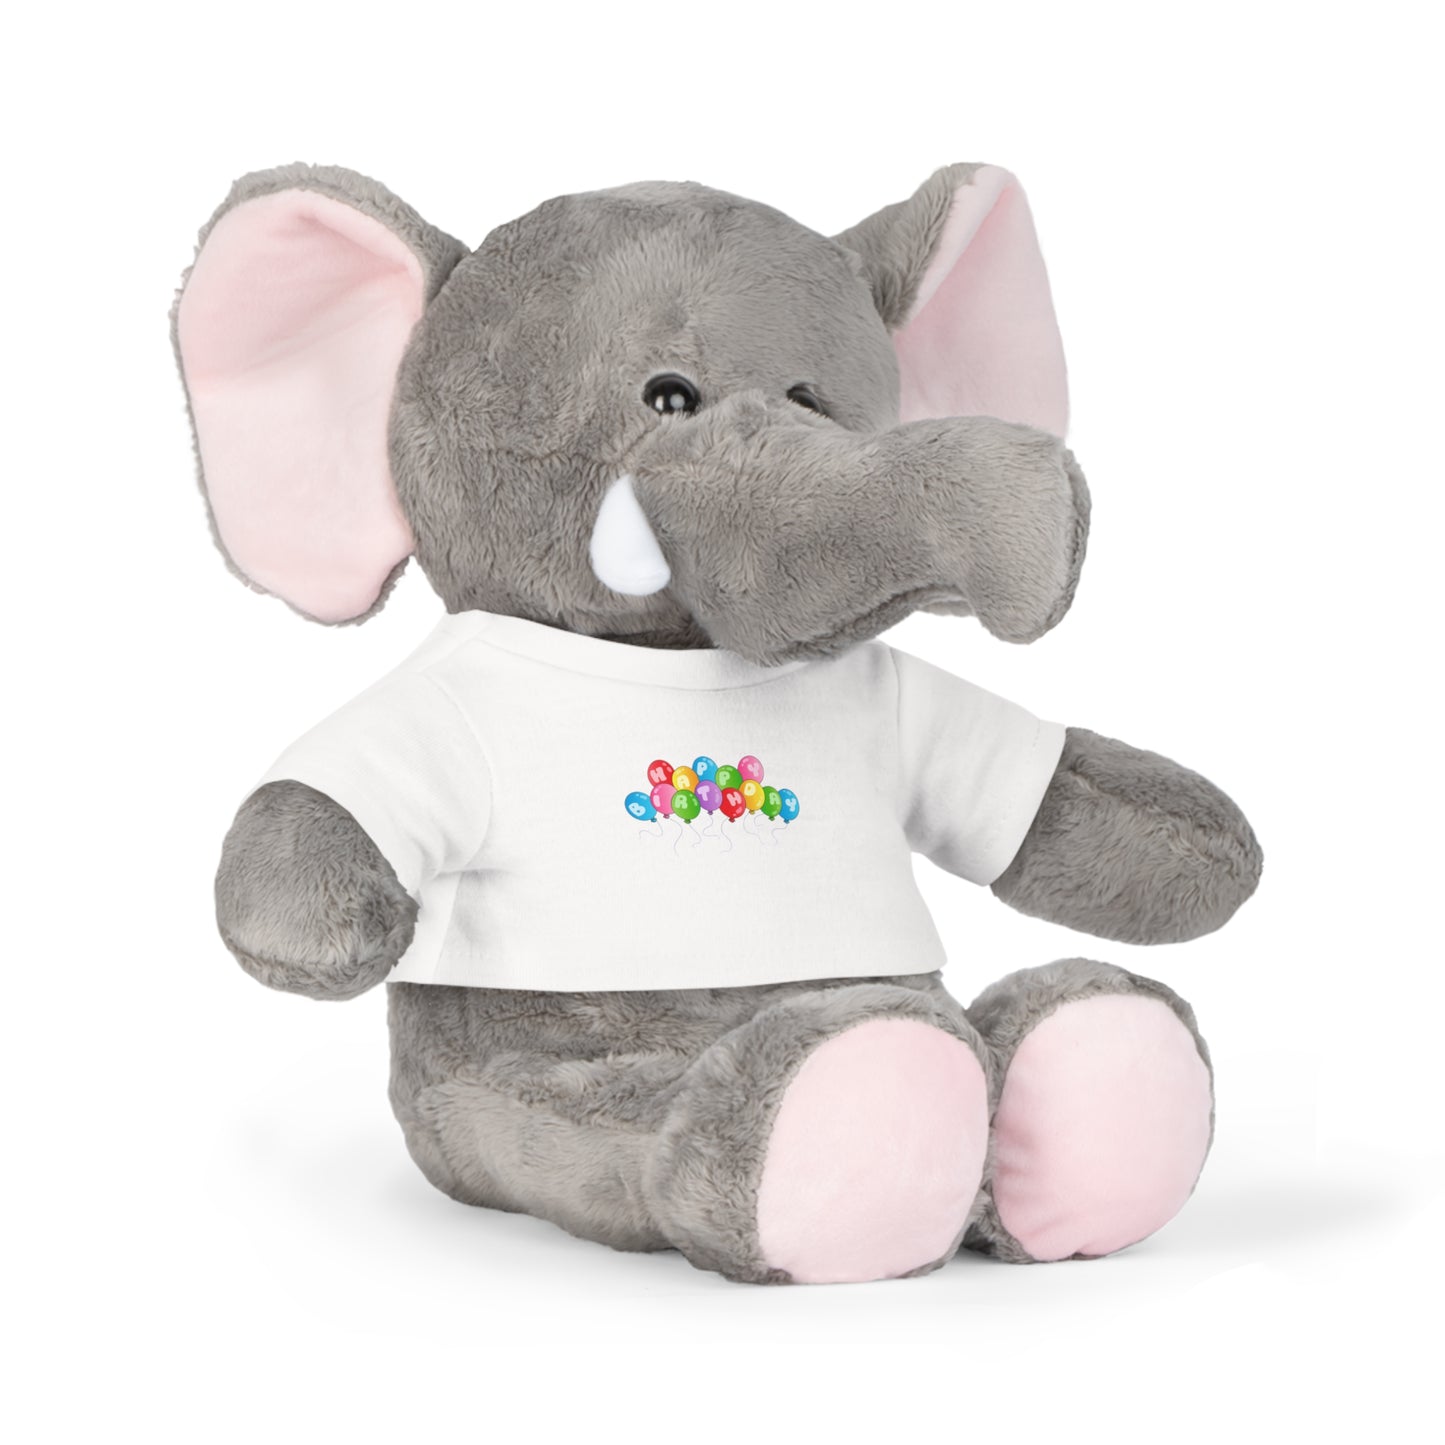 Plush Toy with Happy Birthday T-Shirt, Choose Your Favorite Animal - Bear, Bunny, Elephant, or Sheep